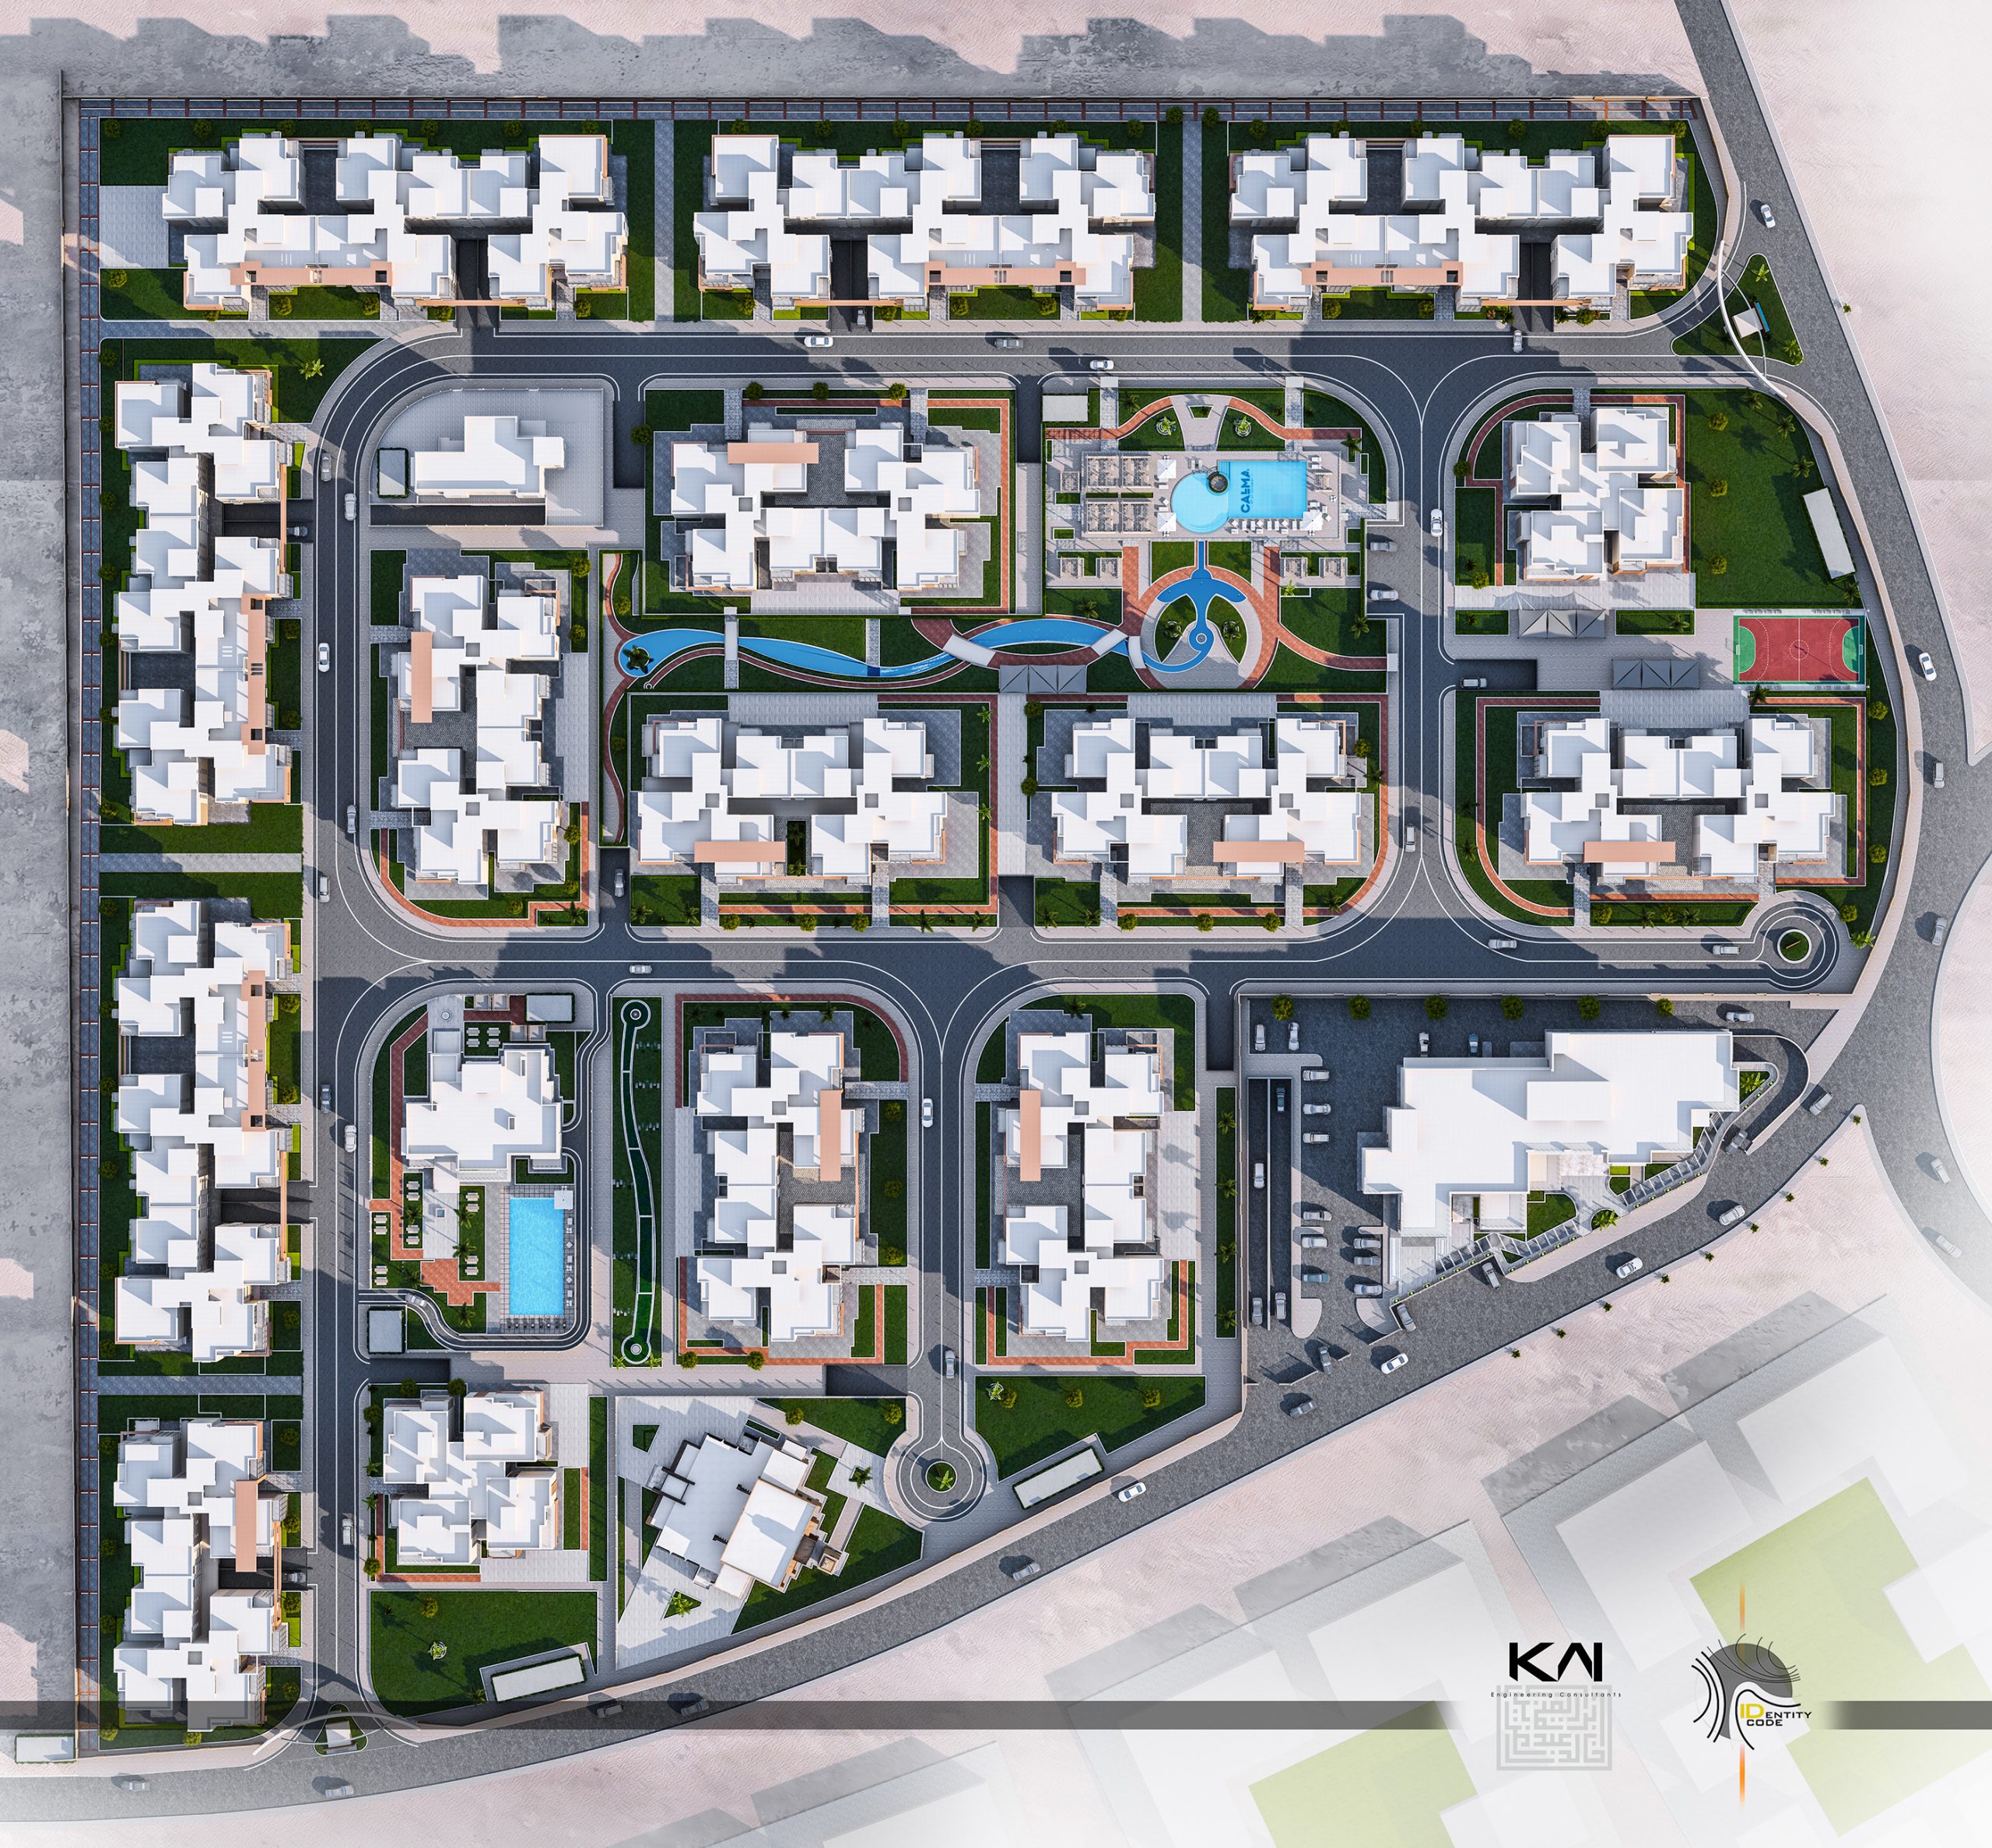 Receive your apartment in the largest of October’s compounds, Calma Compound, with an area of 155 m